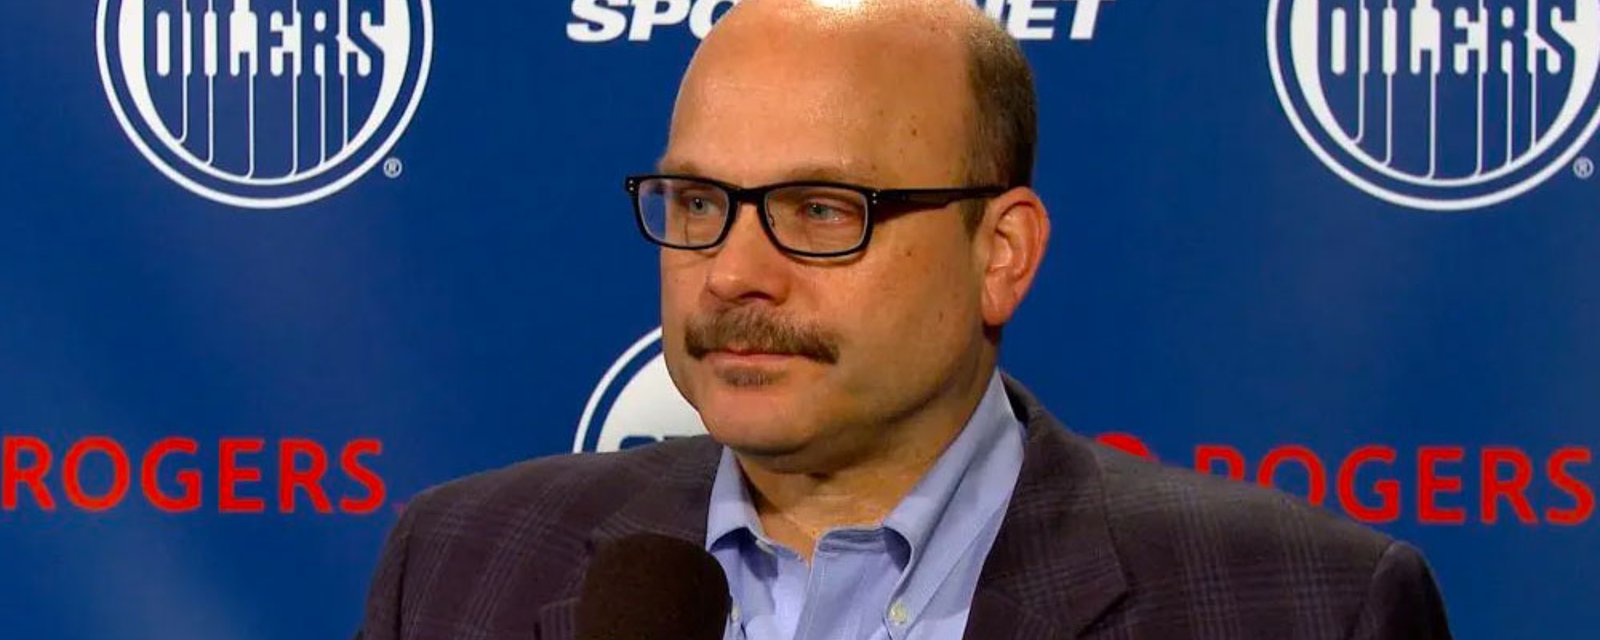 Former Bruins and Oilers GM Peter Chiarelli joins Canadian NHL team